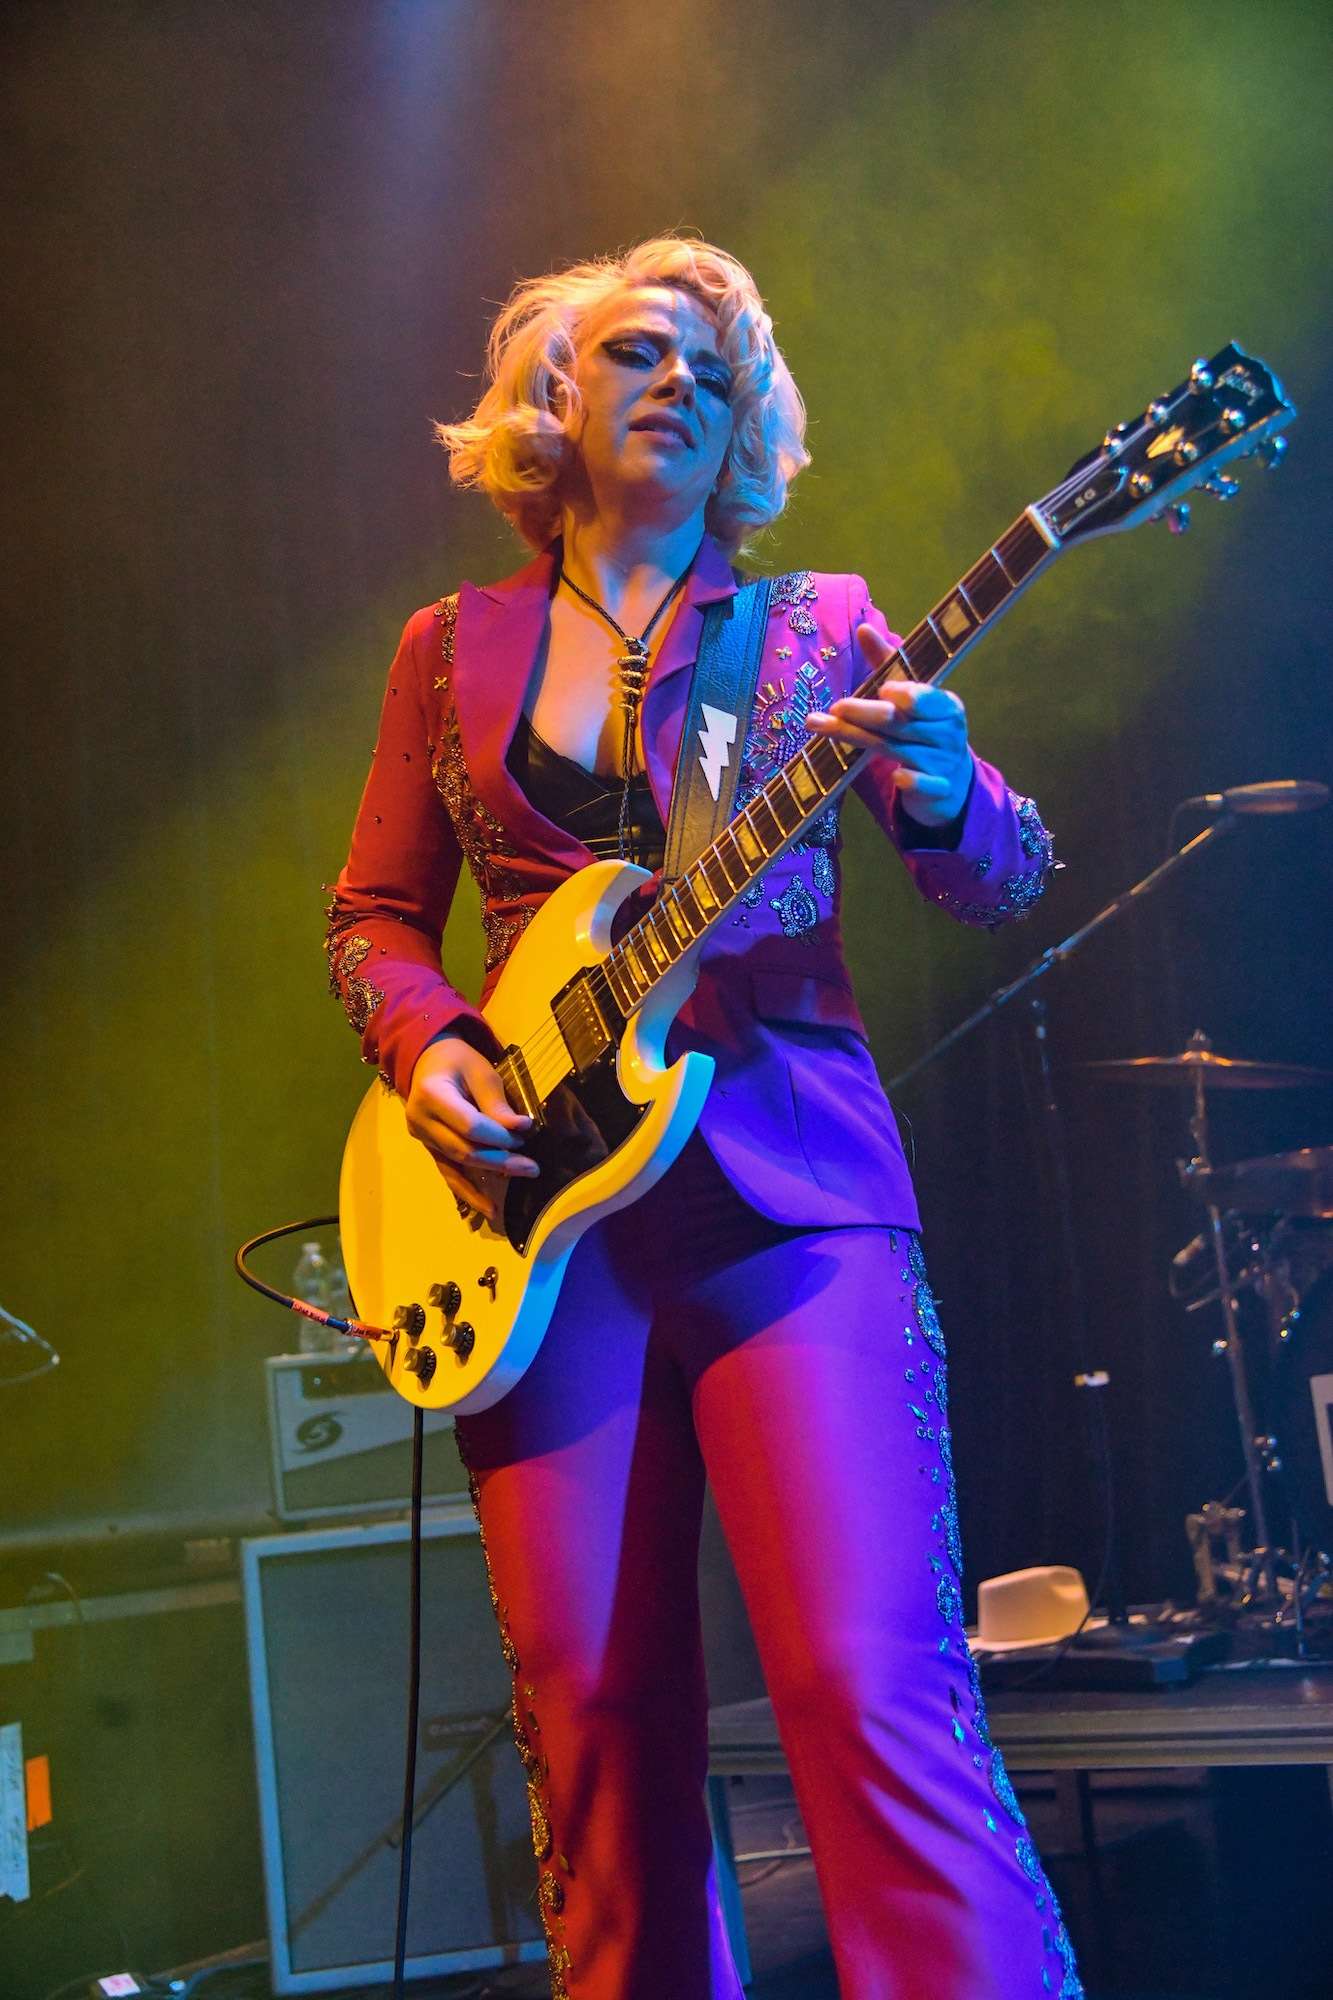 Samantha Fish Live at Park West [GALLERY] 3